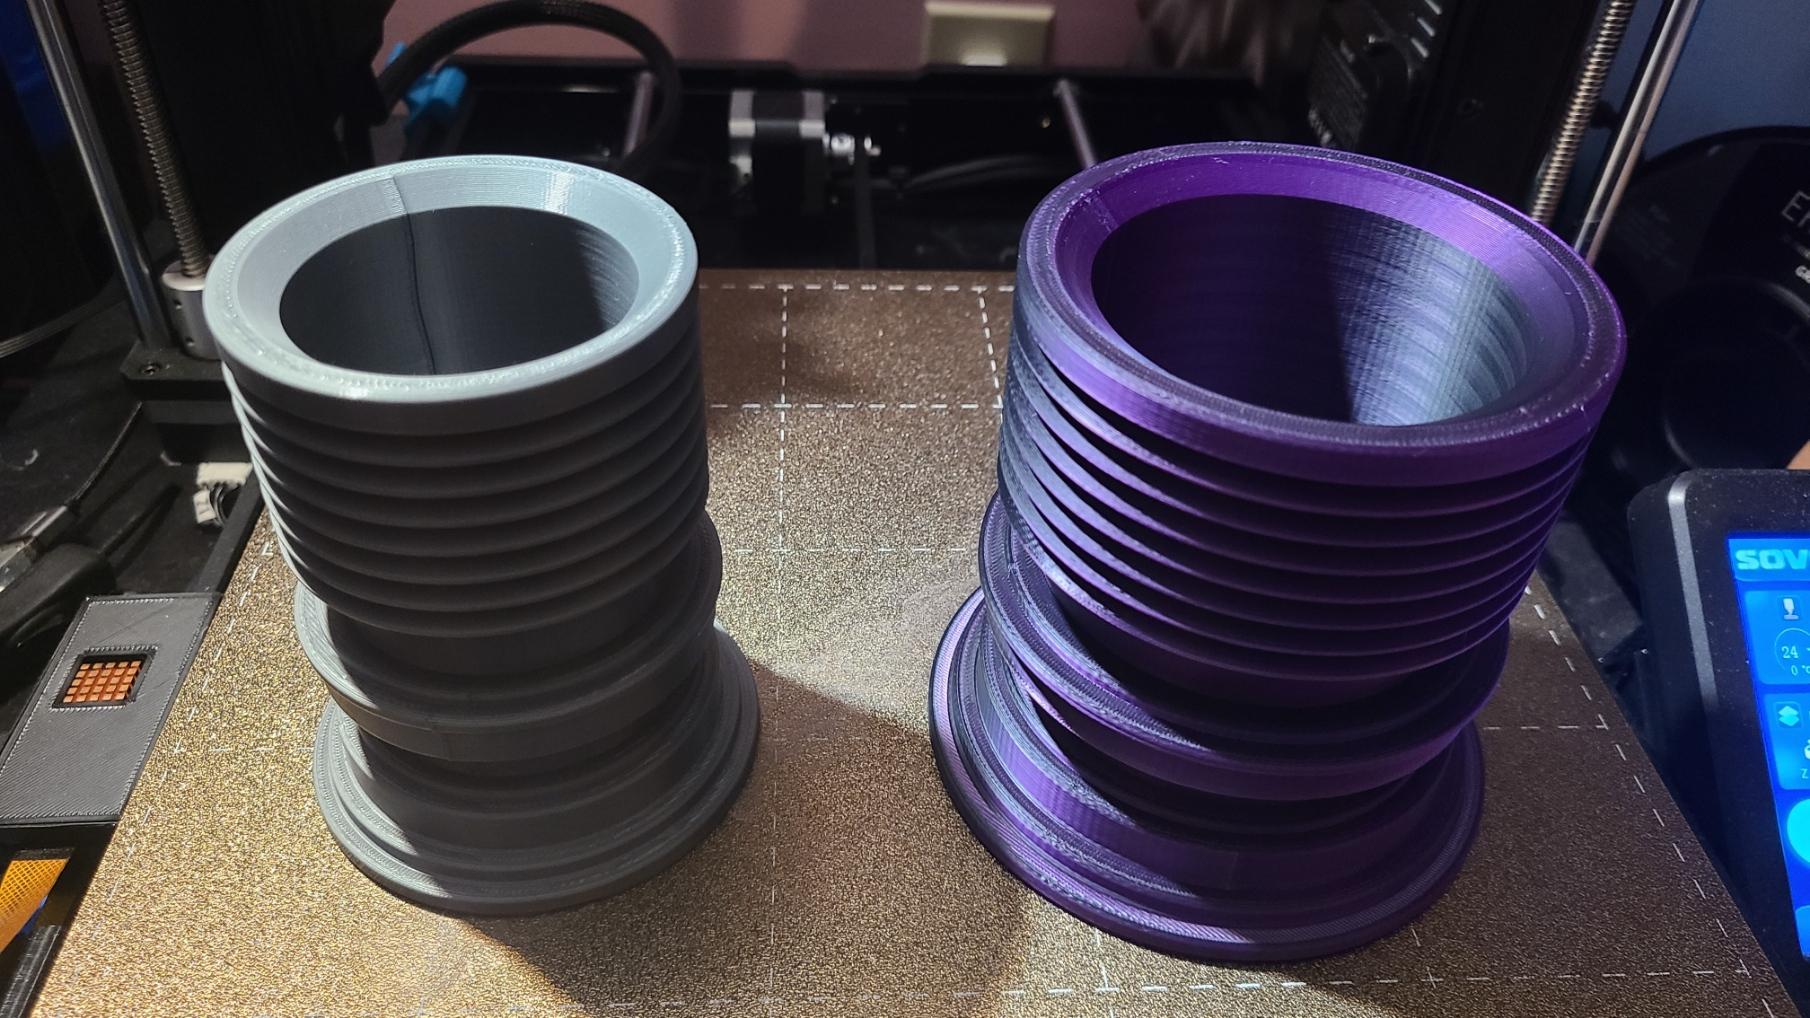 LIGHTSABER PEN CUP.stl - Original on left, printed with Polymaker Polylite Grey PLA on a Sovol SV06.
Wife wanted a larger one for storing crochet hooks, etc., so scaled X&Y to 133%; Printed with 
Eryone Black and Purple Silk PLA on a Sovol SV06 Plus. - 3d model